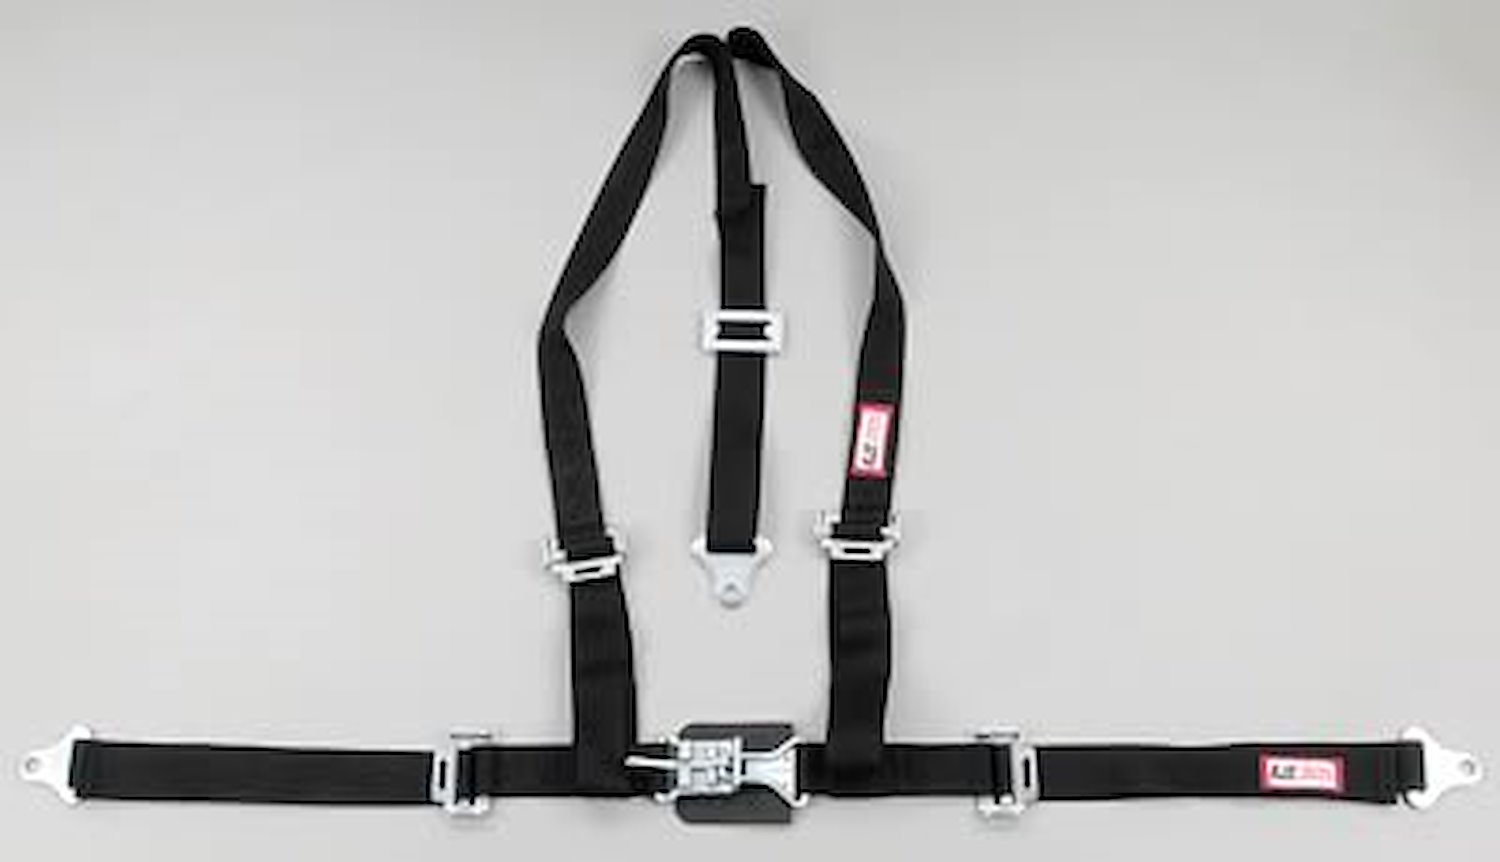 NON-SFI L&L HARNESS 3 PULL UP Lap Belt SNAP SEWN IN 2 S.H. Individual FLOOR Mount WRAP/BOLT RED